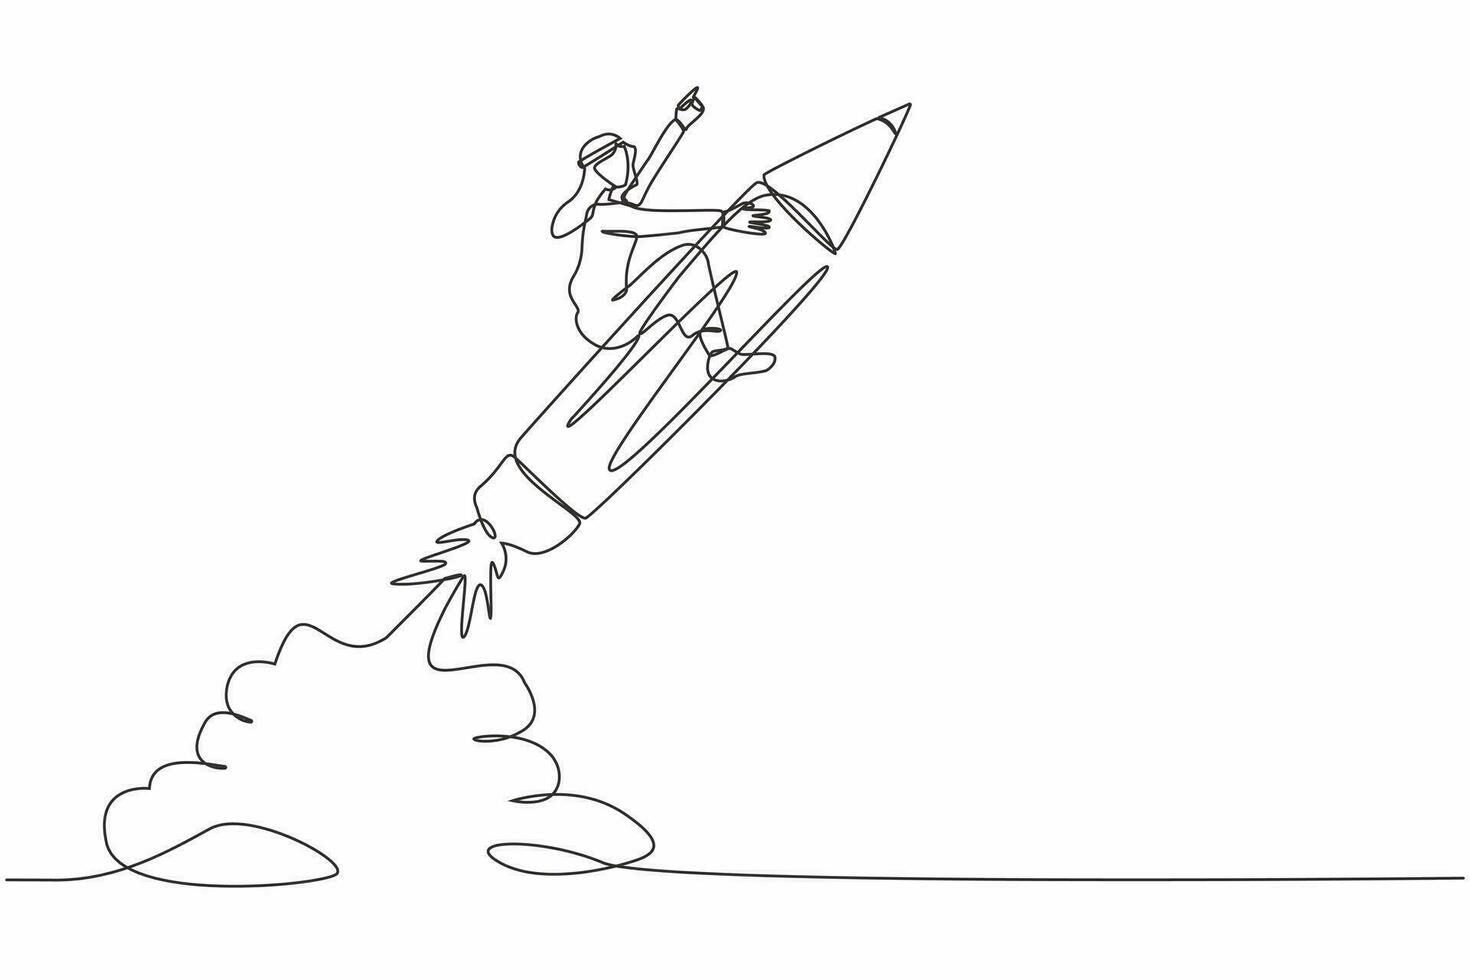 Single one line drawing young Arabian businessman riding pencil rocket flying in sky. Concept of education, creativity, imagination or creative freedom. Continuous line draw design vector illustration